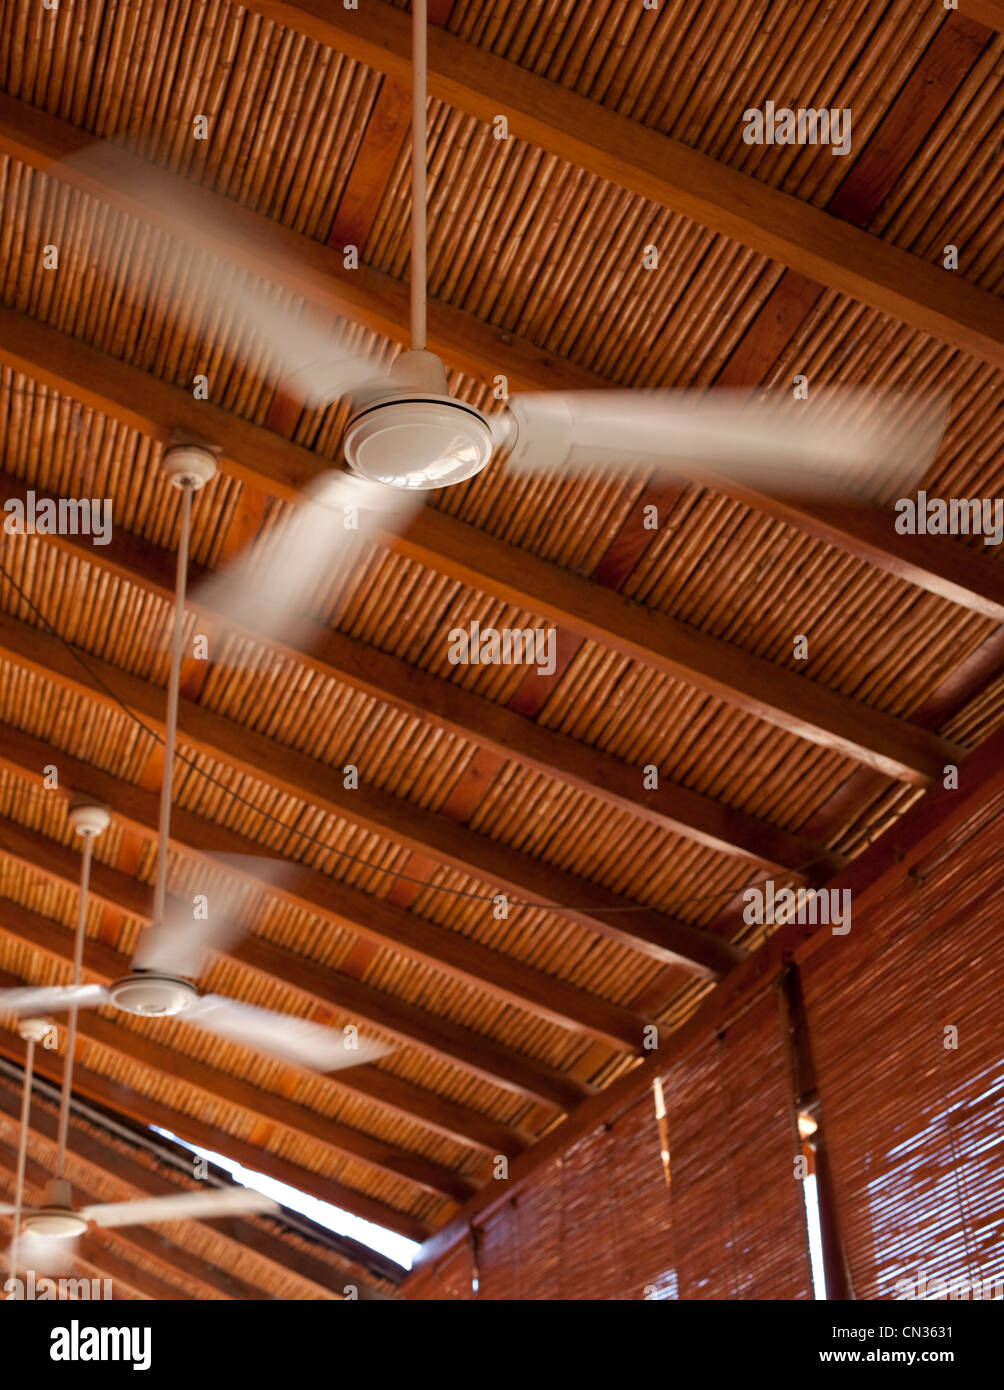 Ceiling fans Stock Photo